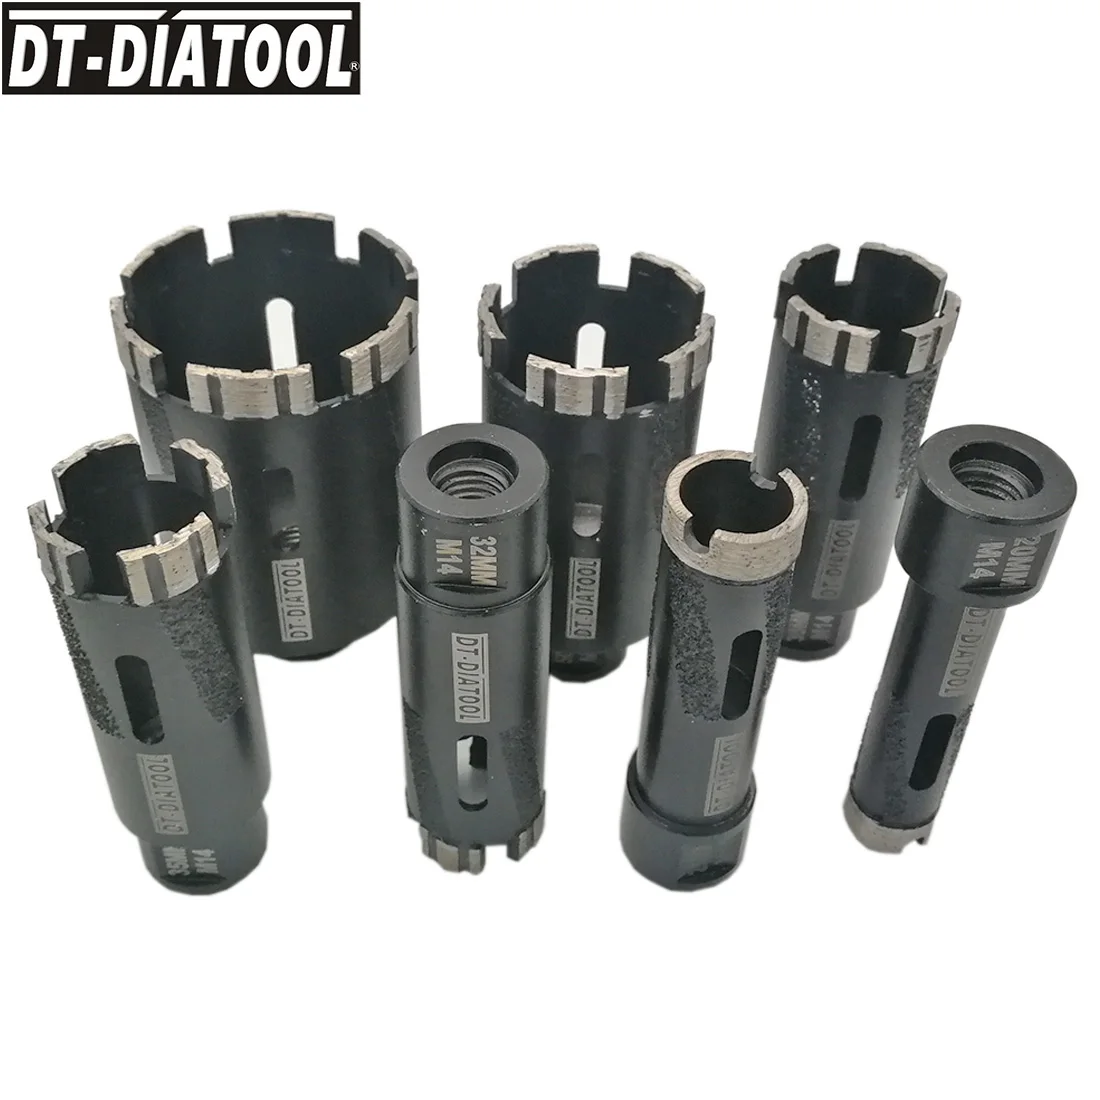 DT-DIATOOL 1pc M14 Thread Laser Welded Dry Diamond Hole Saw Dry Drilling Core Bits for Drilling Hard Granite Marble Stone dt diatool 1pc diamond dry drilling core bit granite marble drill bit nature stone hole saw m14 or 5 8 11 thread laser welded